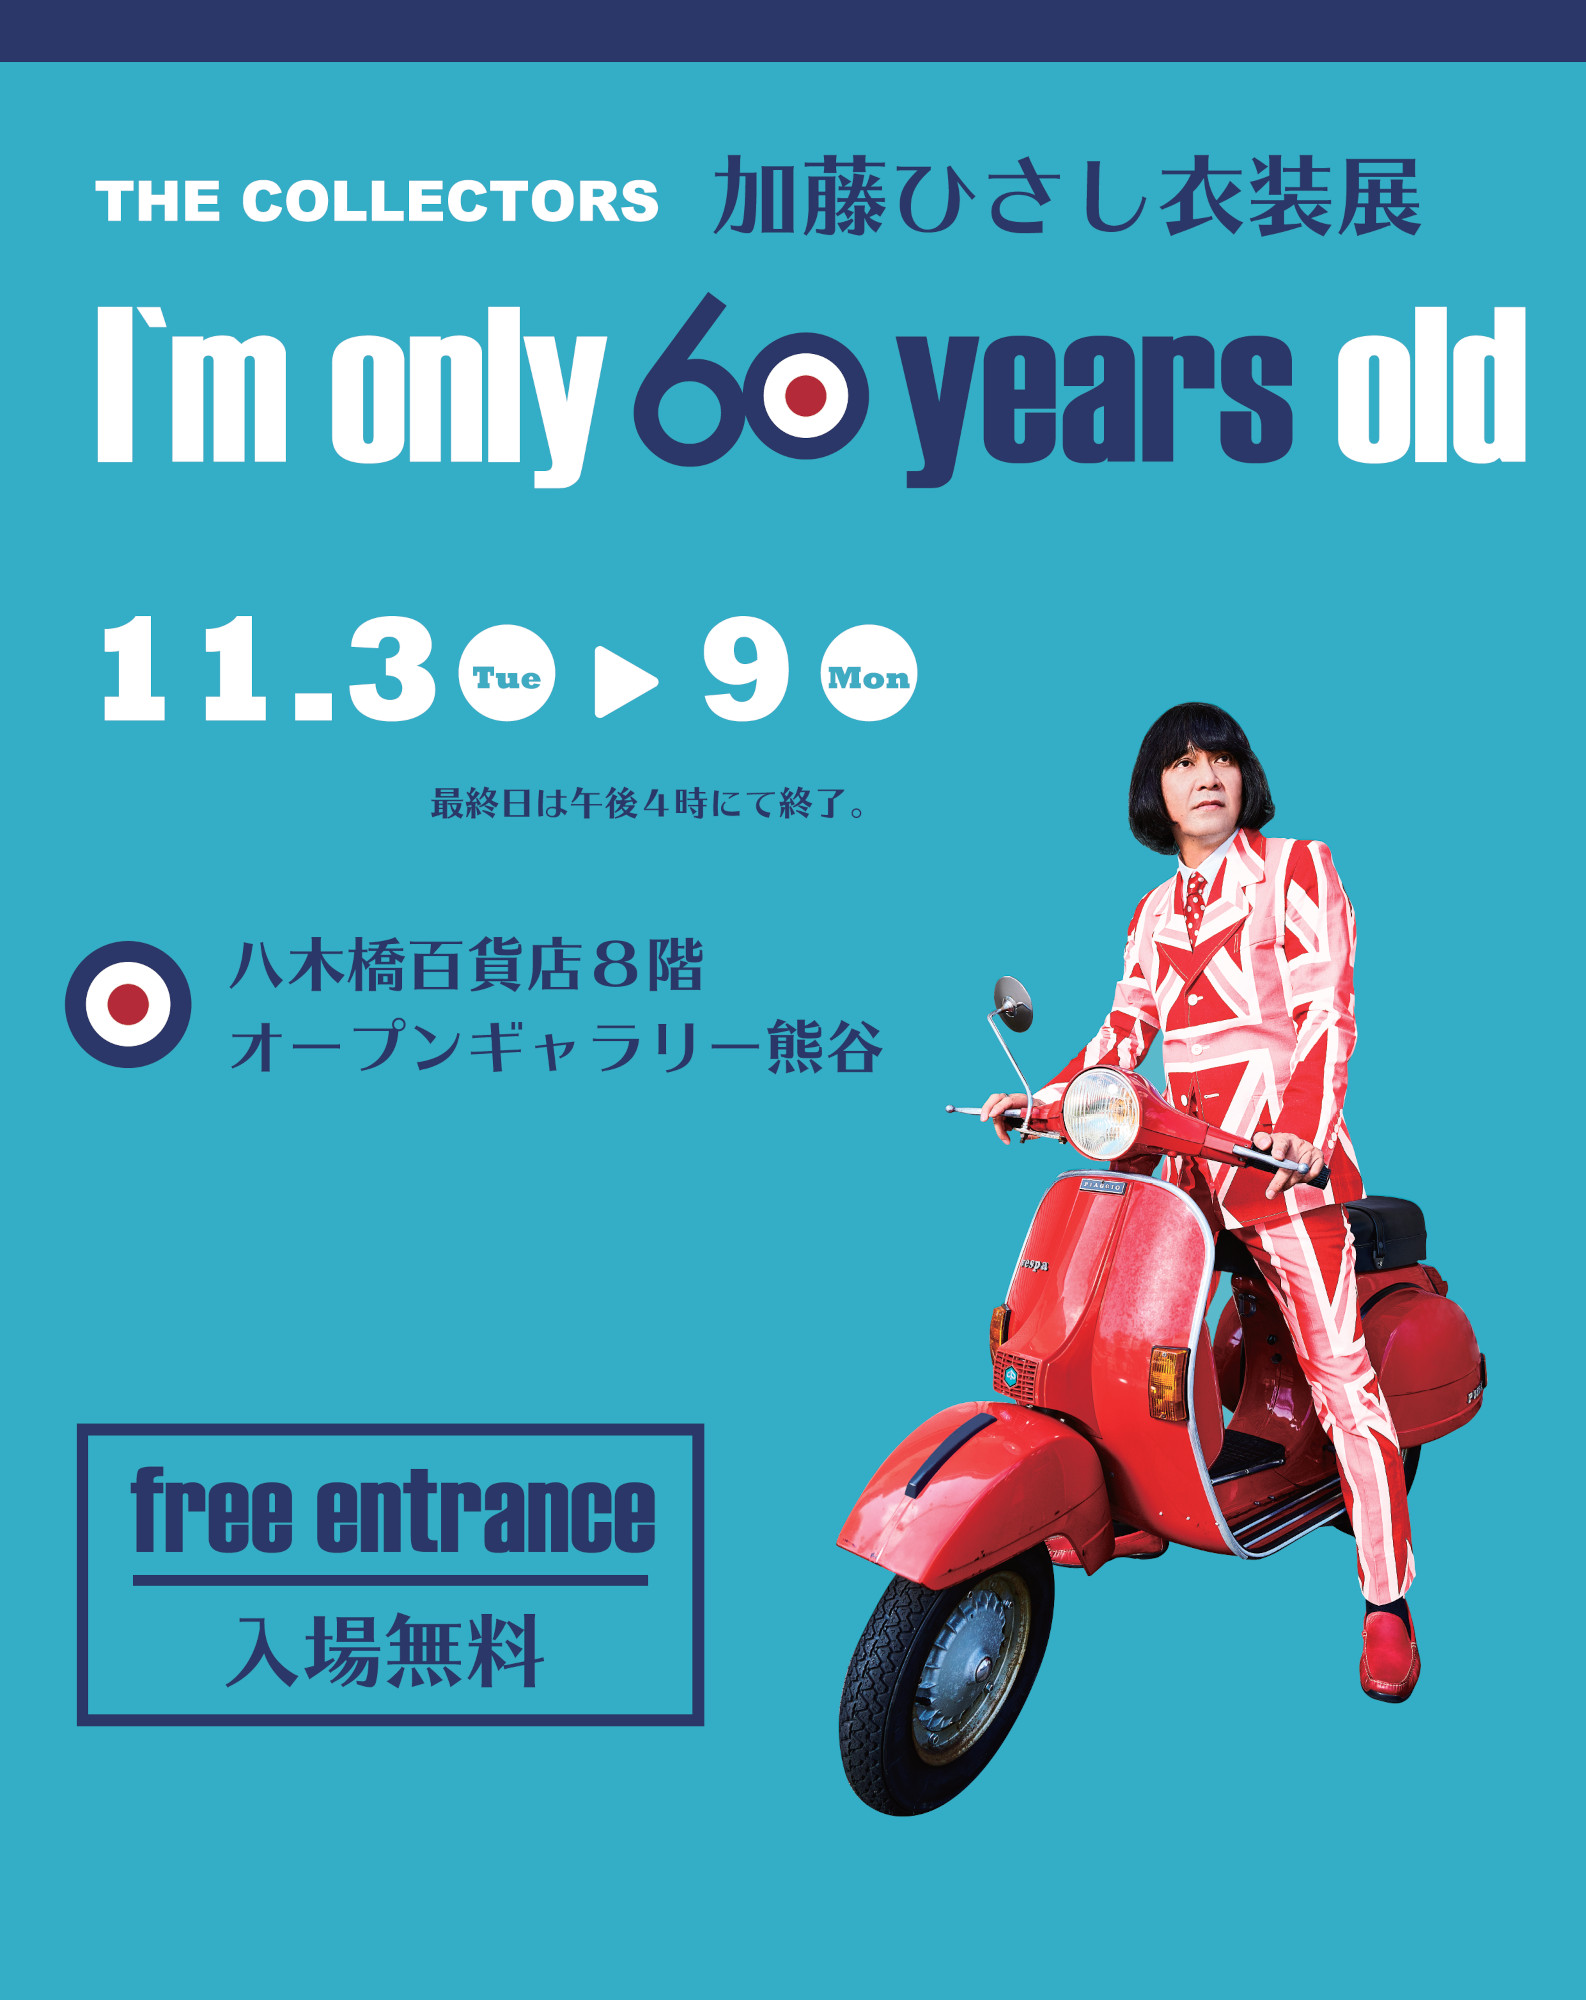 The Collectors加藤ひさし衣装展 I M Only 60 Years Old イベント情報 八木橋百貨店